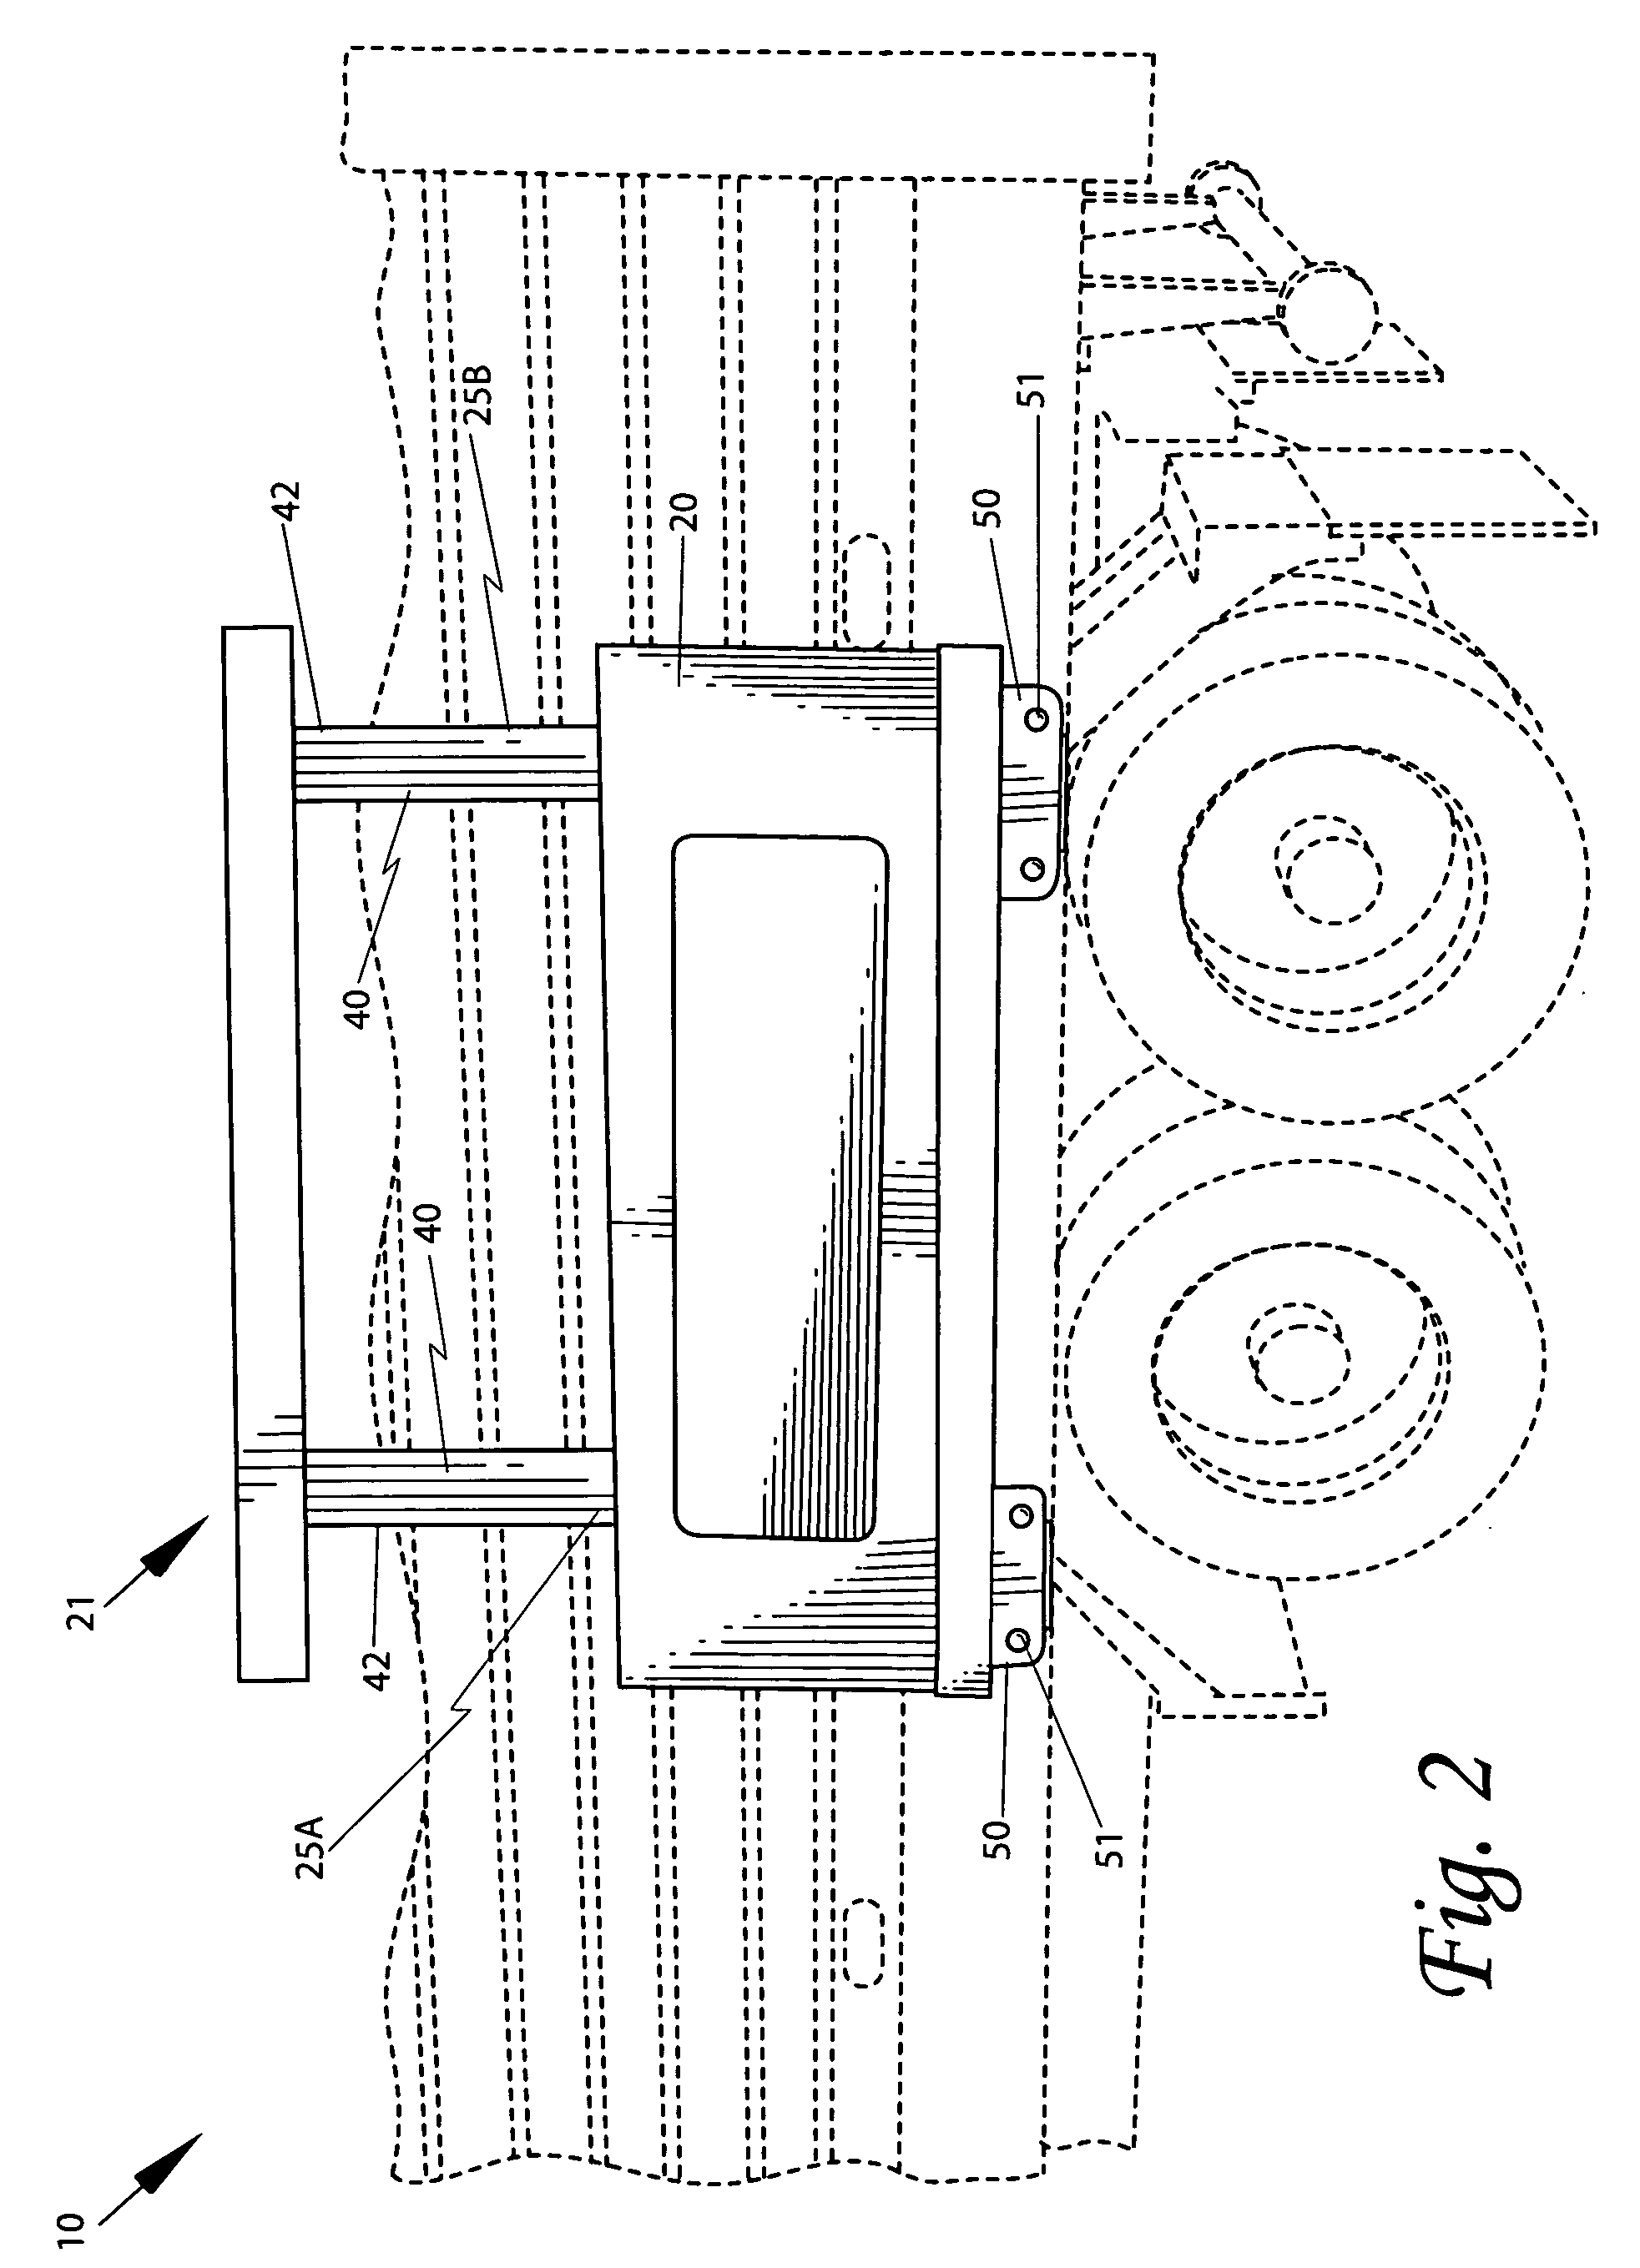 Retractable auxiliary mud flap device and associated method